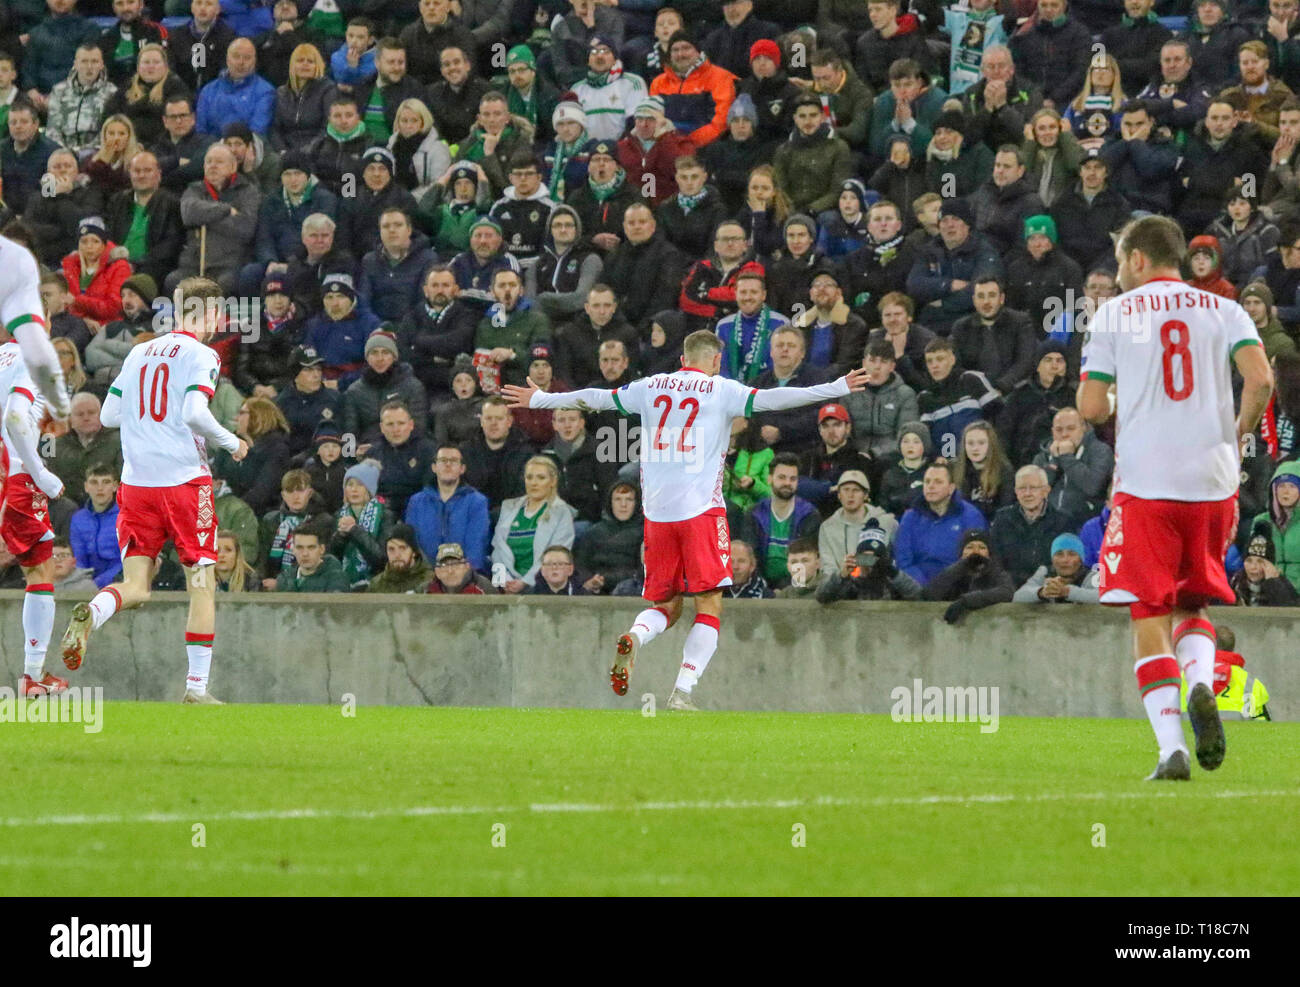 National Football Stadium at Windsor Park, Belfast, Northern Ireland. 24  March 2019. UEFA EURO 2020 Qualifier- Northern Ireland v Belarus. Action from tonight's game. Igor Stasevich (22) celebrates his goal for Belarus.  Credit: David Hunter/Alamy Live News. Stock Photo